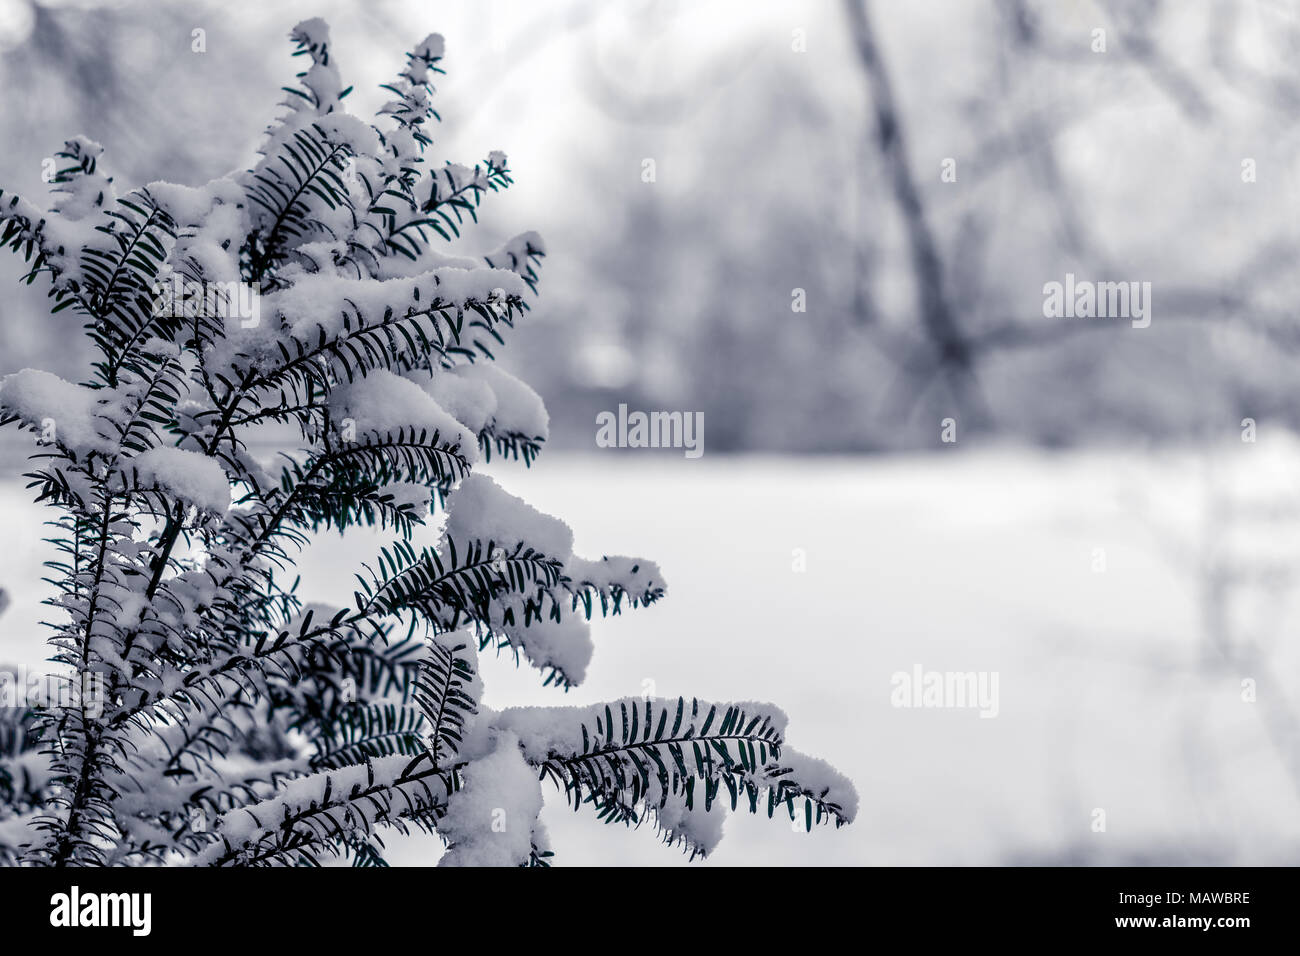 A snow-capped fern sits patiently in Sidcup, England Stock Photo